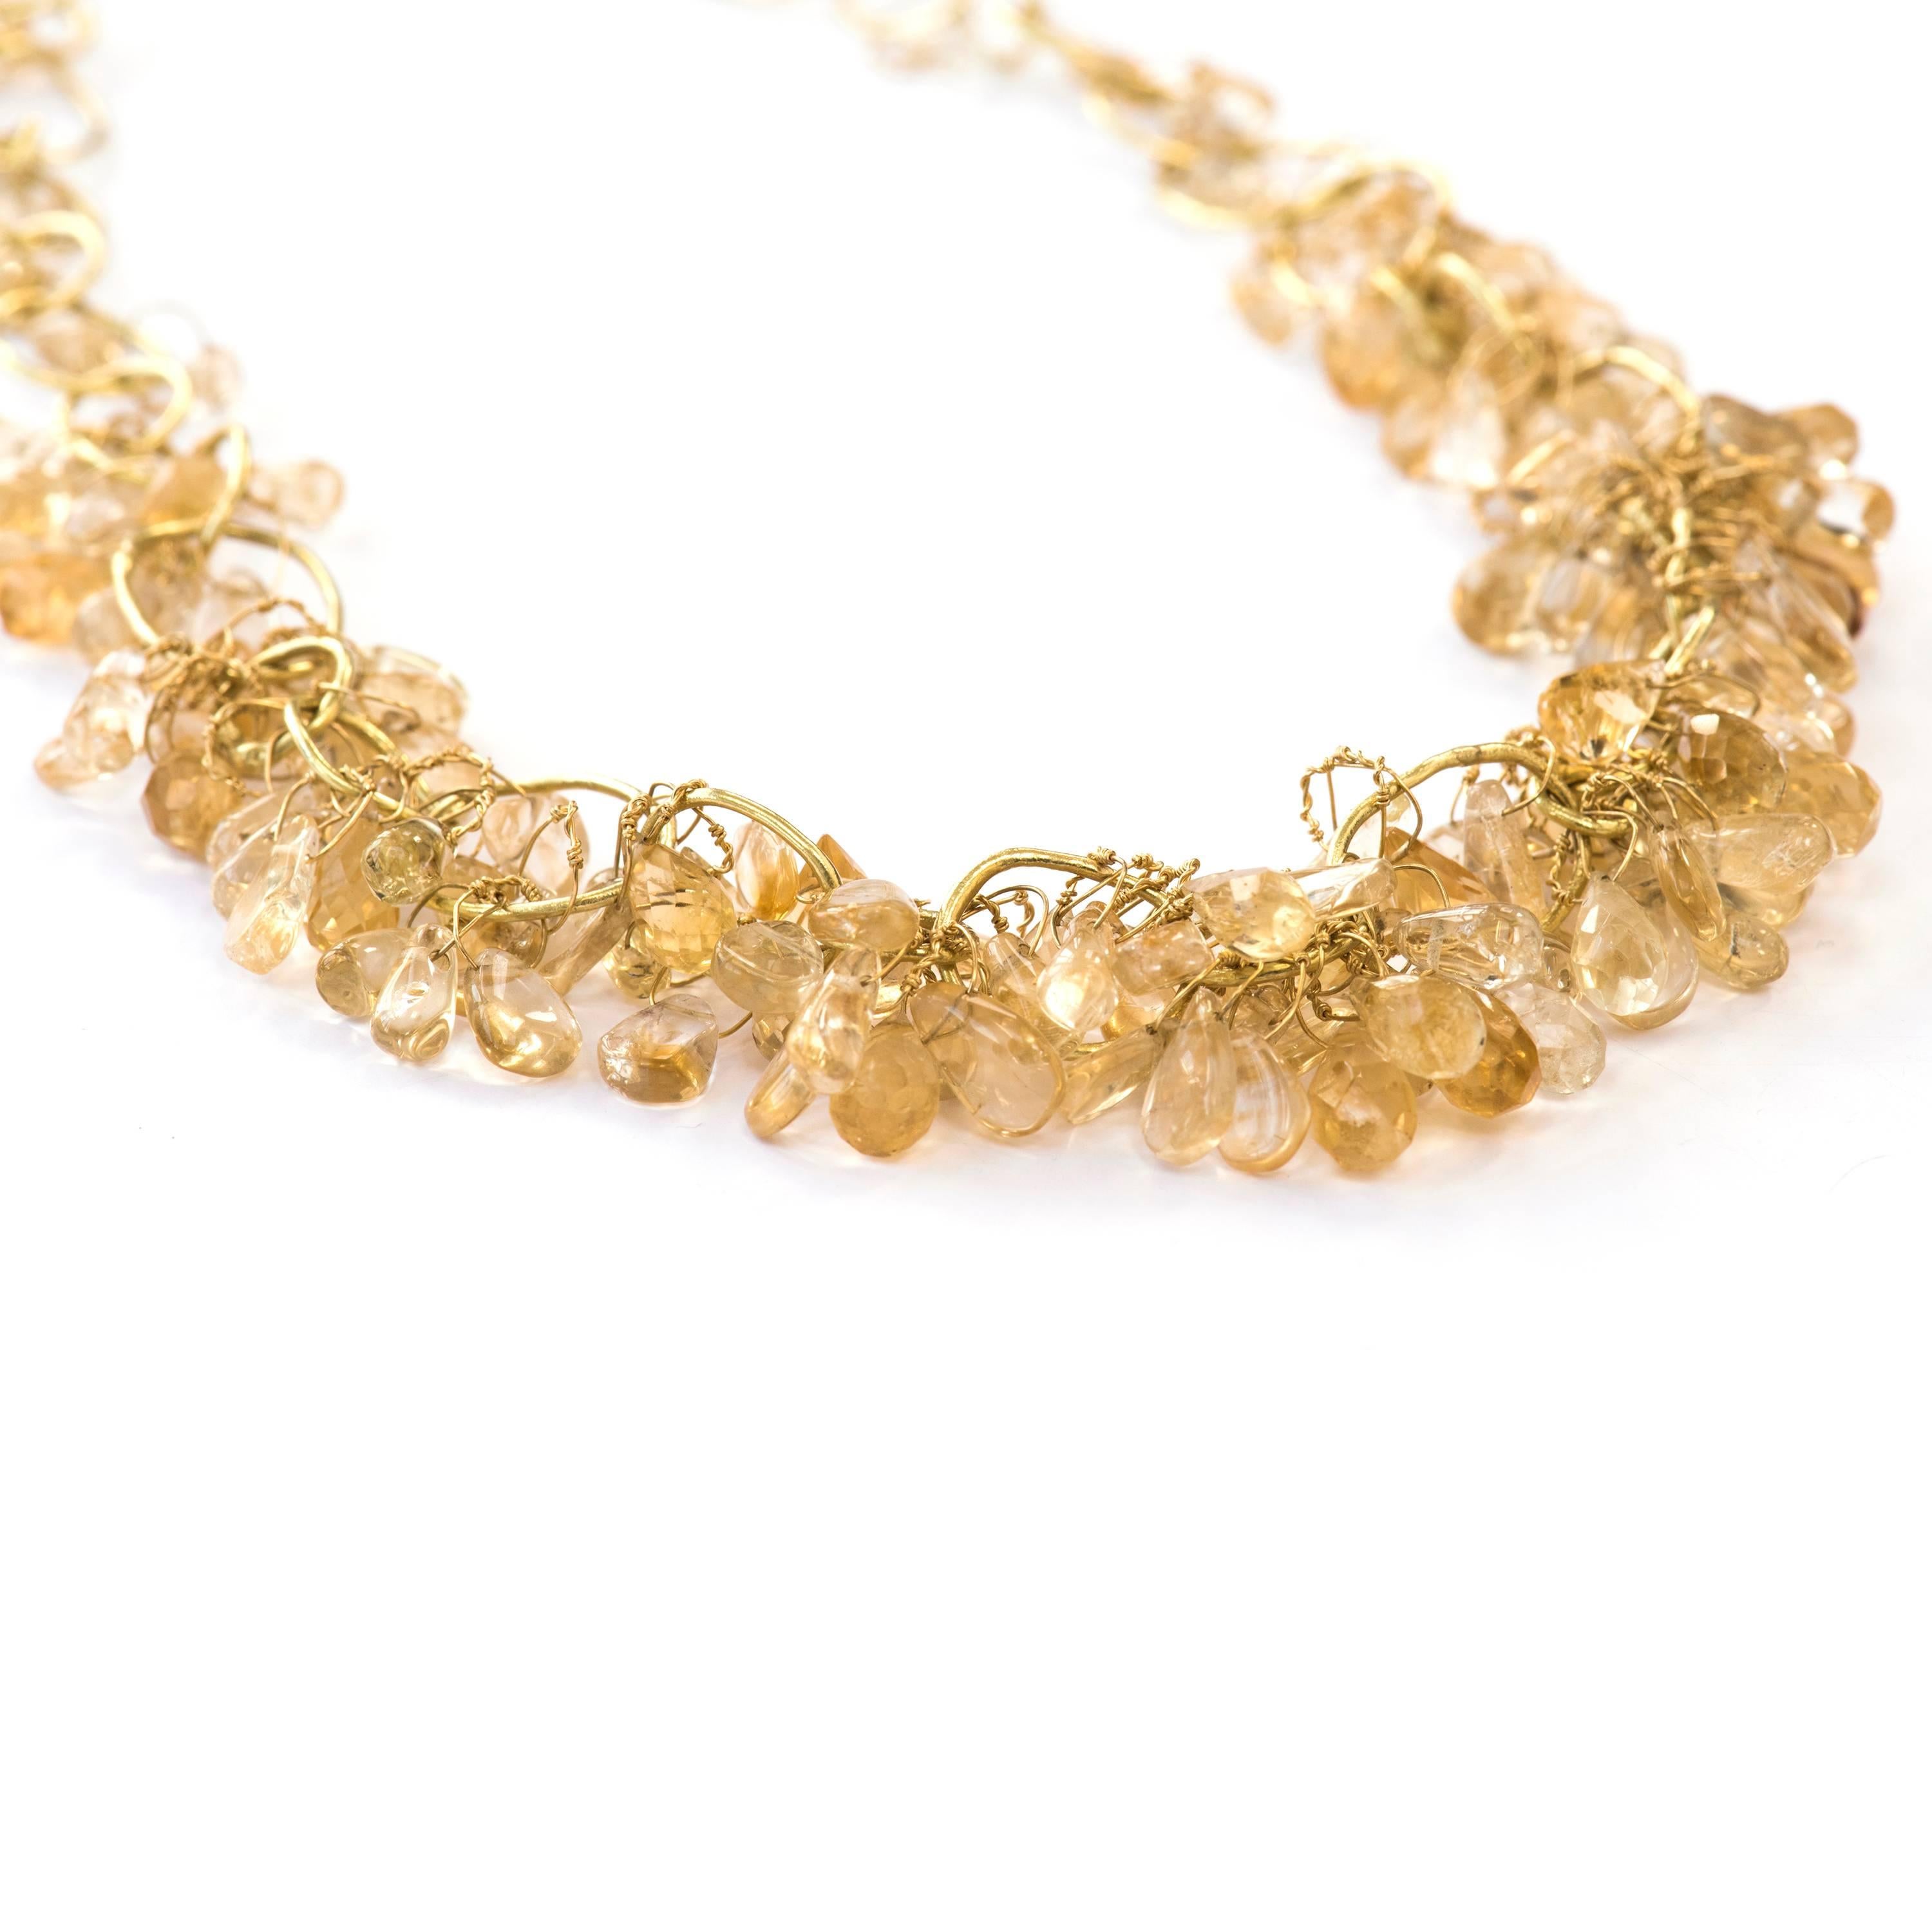 Citrine briollette 18ct Yellow Gold handmade chain necklace. Each chain link is individually made using reticulation techniques. Faceted and cabouchon golden Citrine briollettes are intricately and securely attached. A handmade T-Bar clasp for